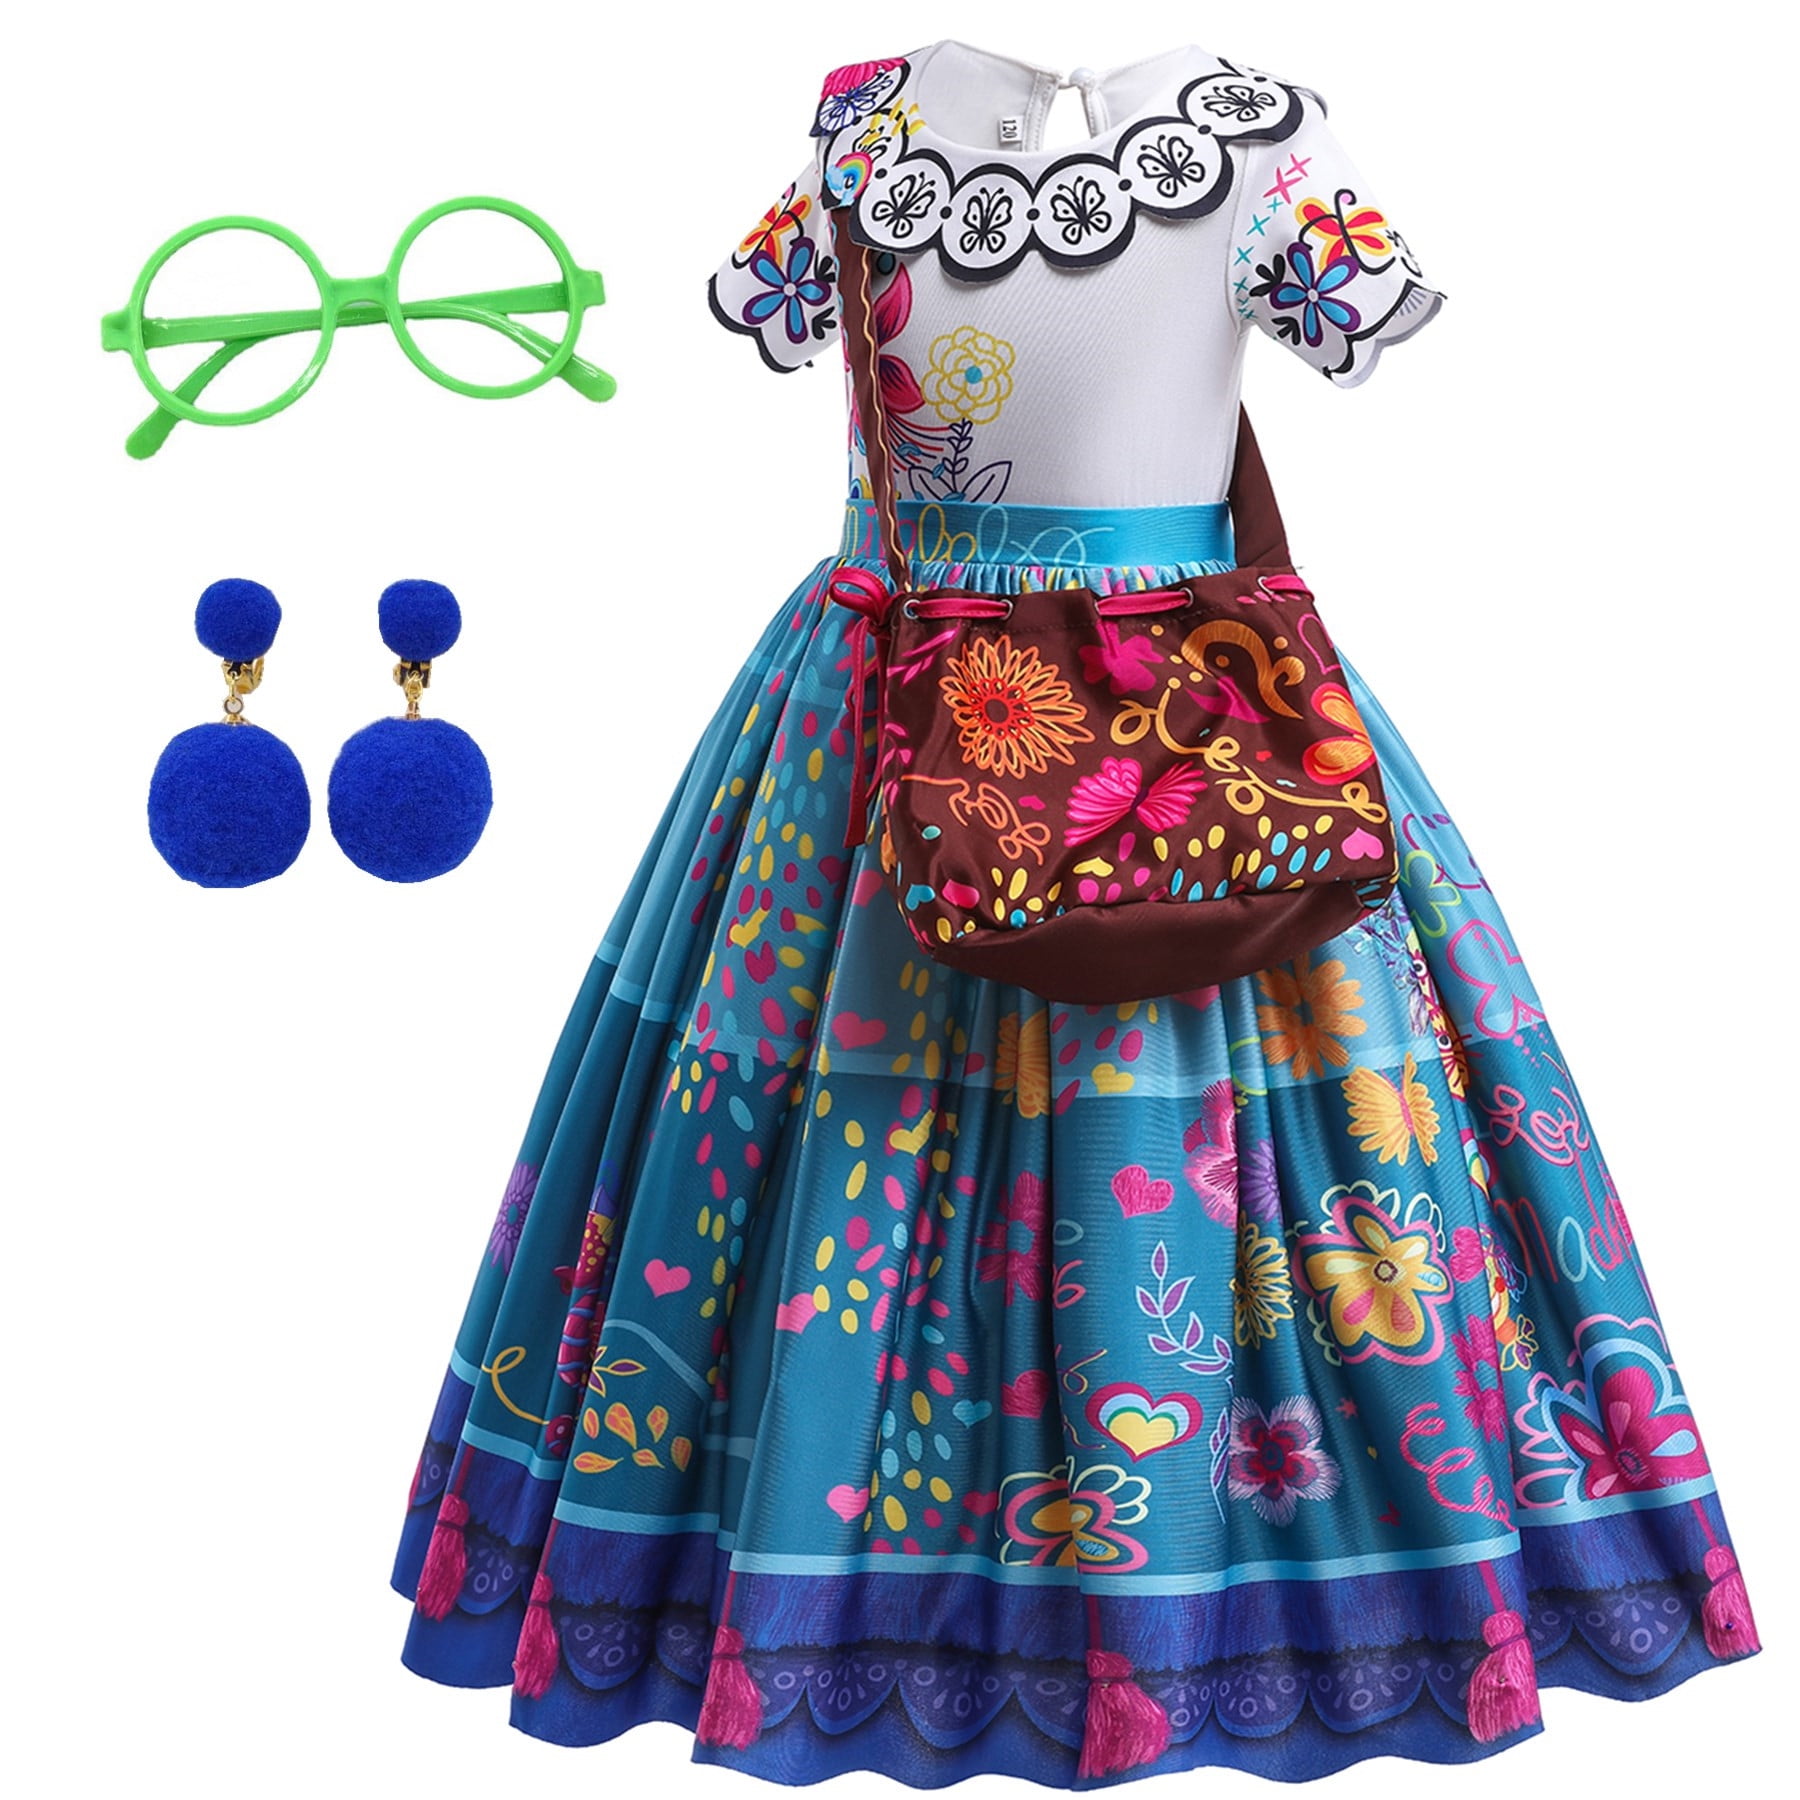 Encanto Dress Mirabel Costume for Girls Madrigal Cosplay outfits